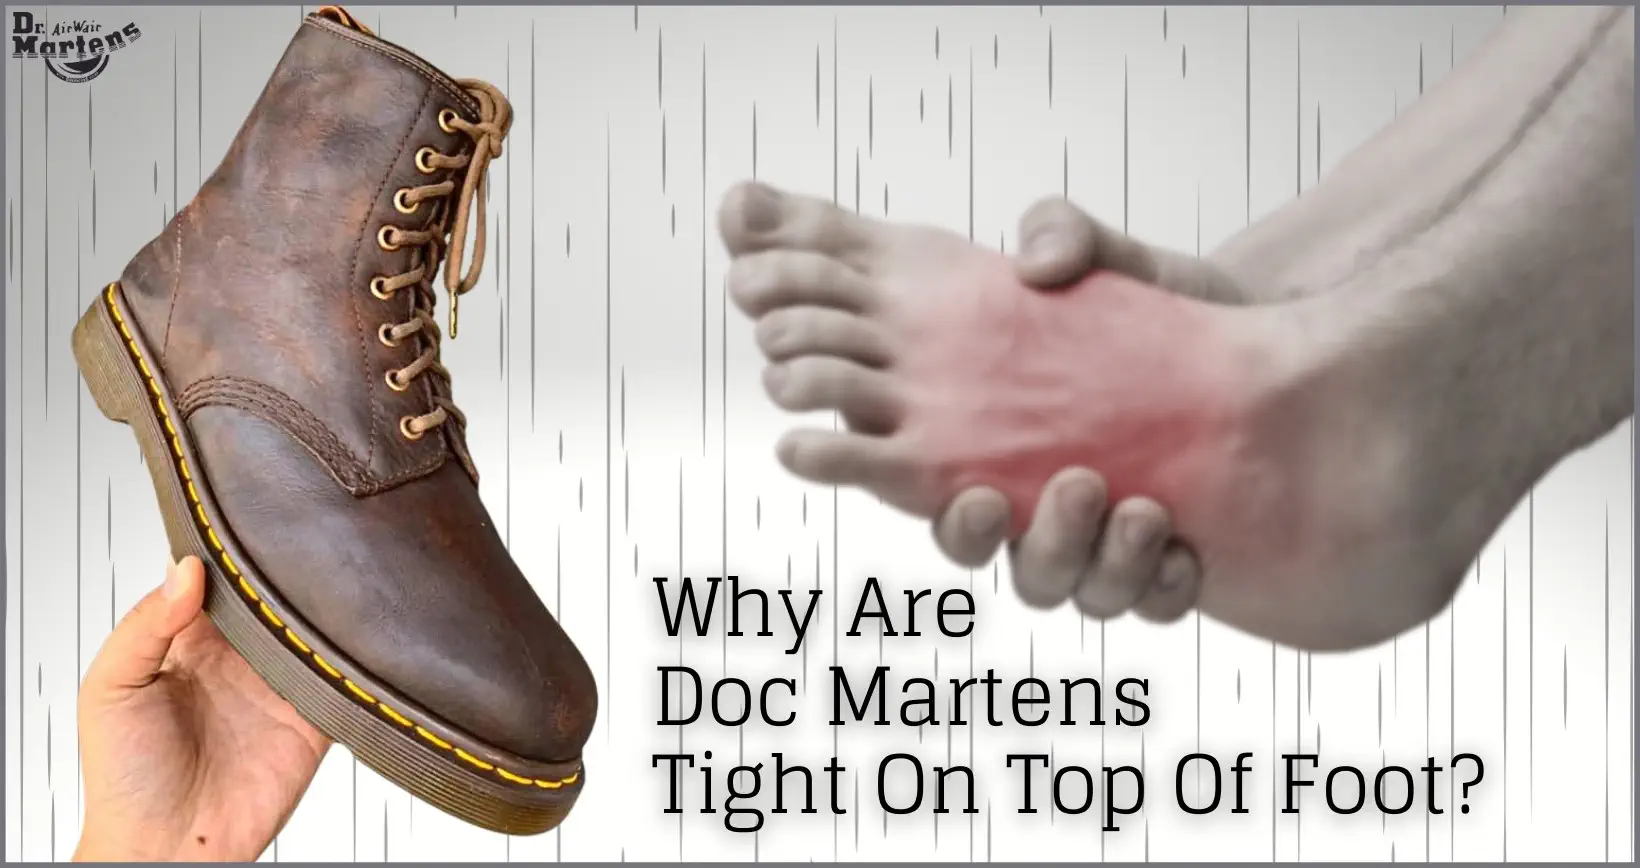 Why Are Doc Martens Tight on Top of Foot?